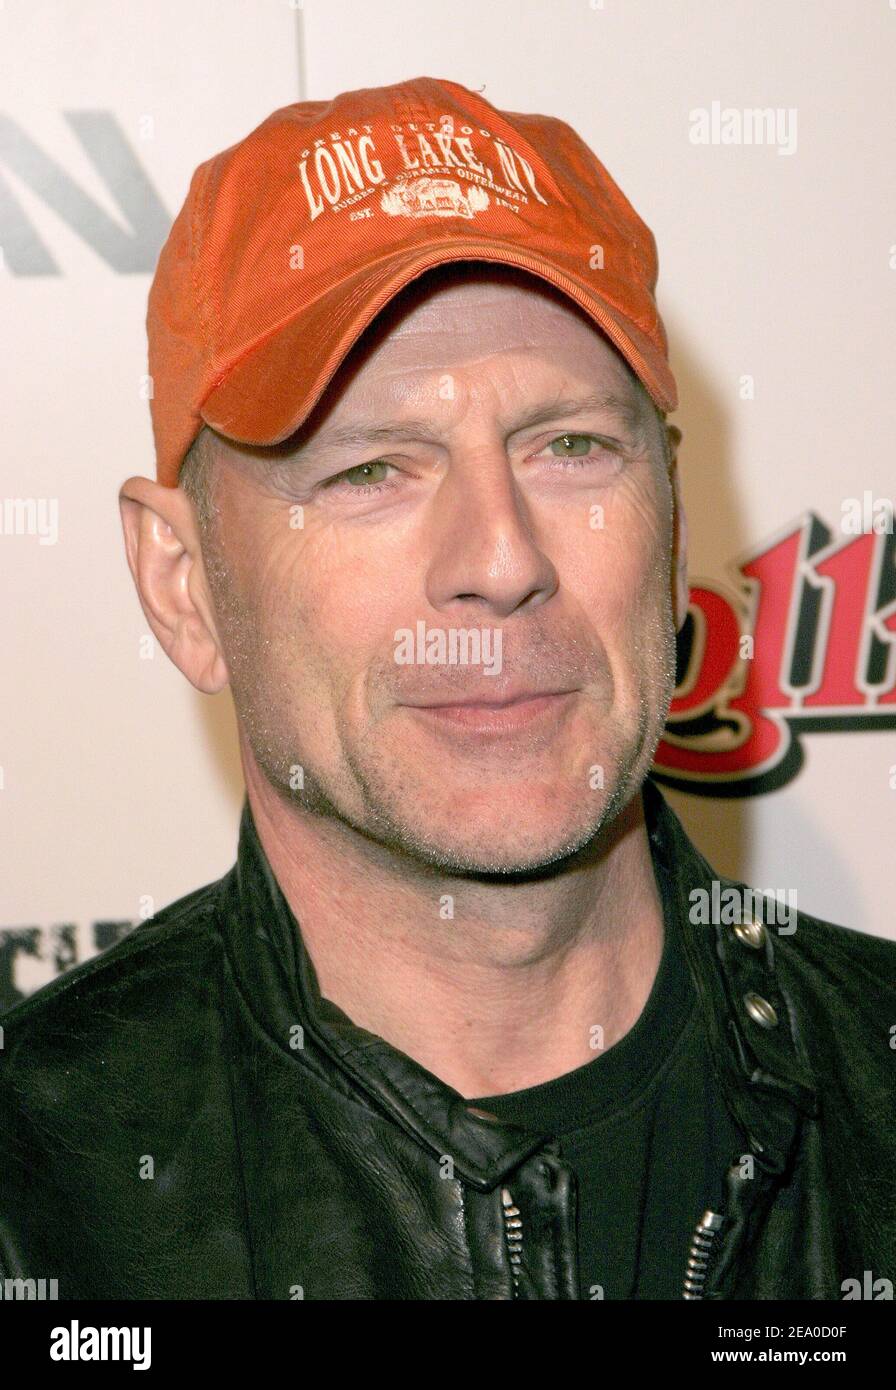 Cast member Bruce Willis attends the world premiere of the Dimension Films release 'Sin City' held at the Mann National Theater in Westwood, CA, USA, on March 28, 2005. Photo by Amanda Parks/ABACA. Stock Photo